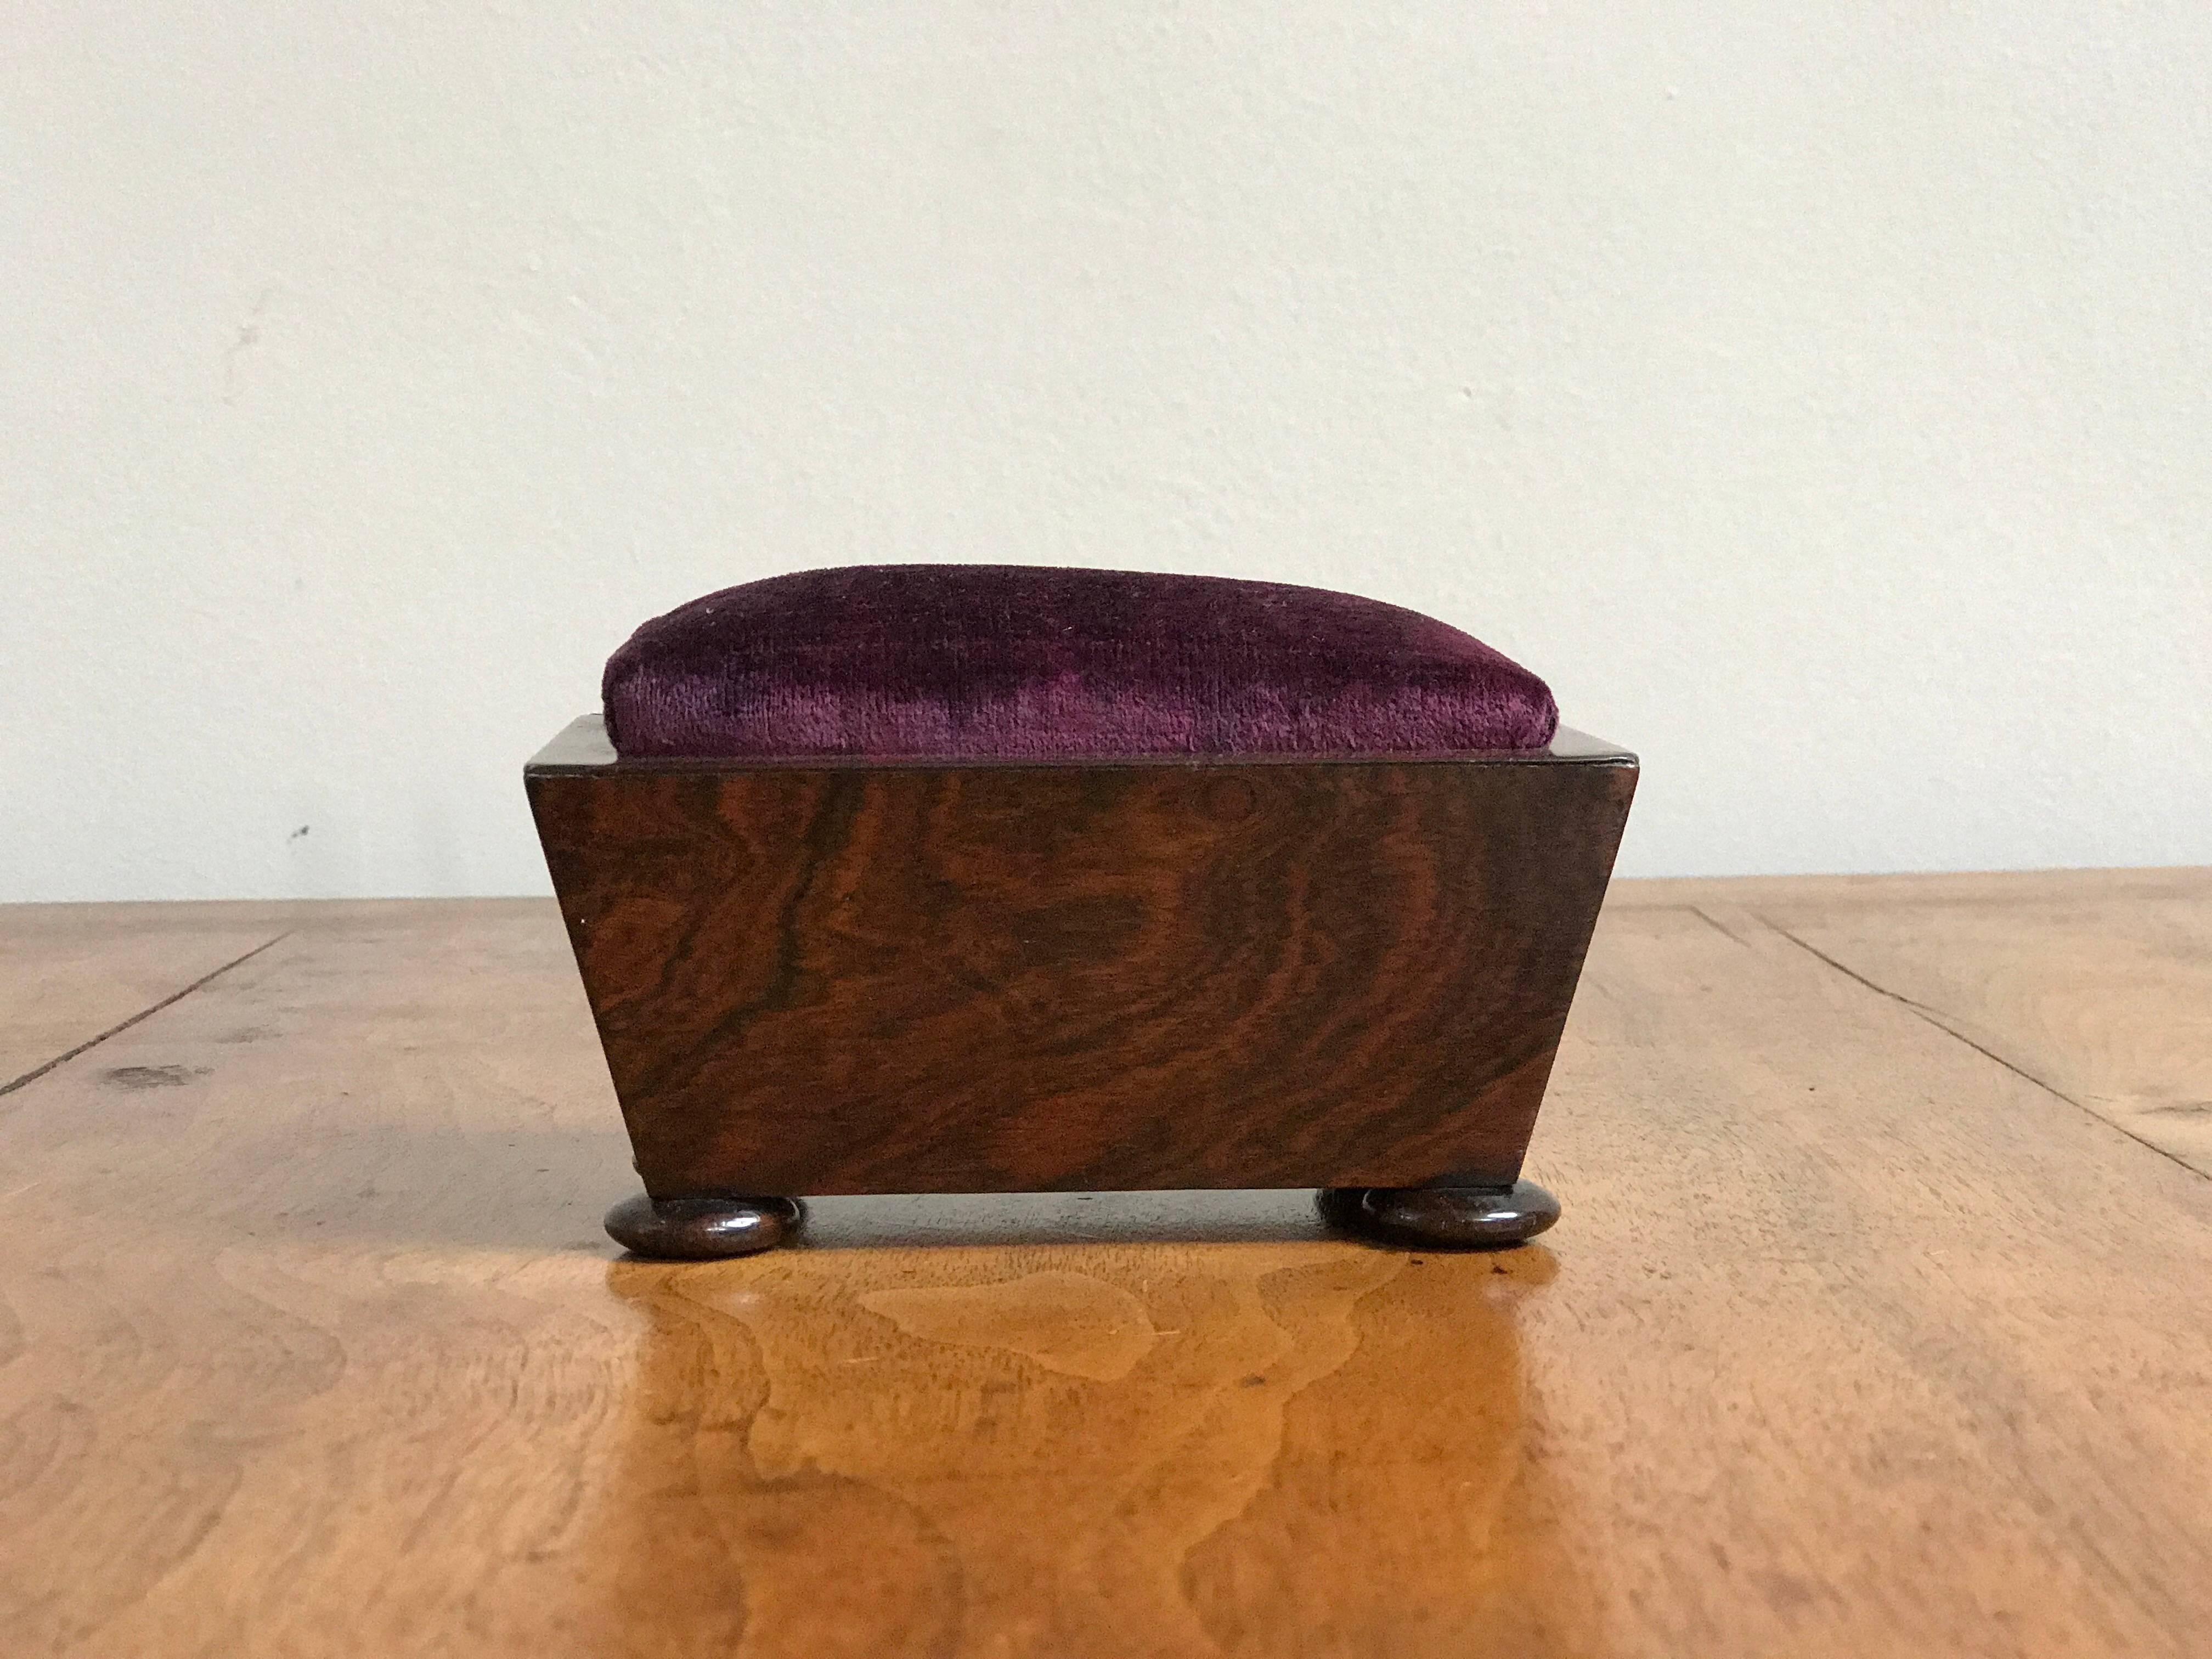 Wooden pin cushion box with round feet from late 19th century England. 